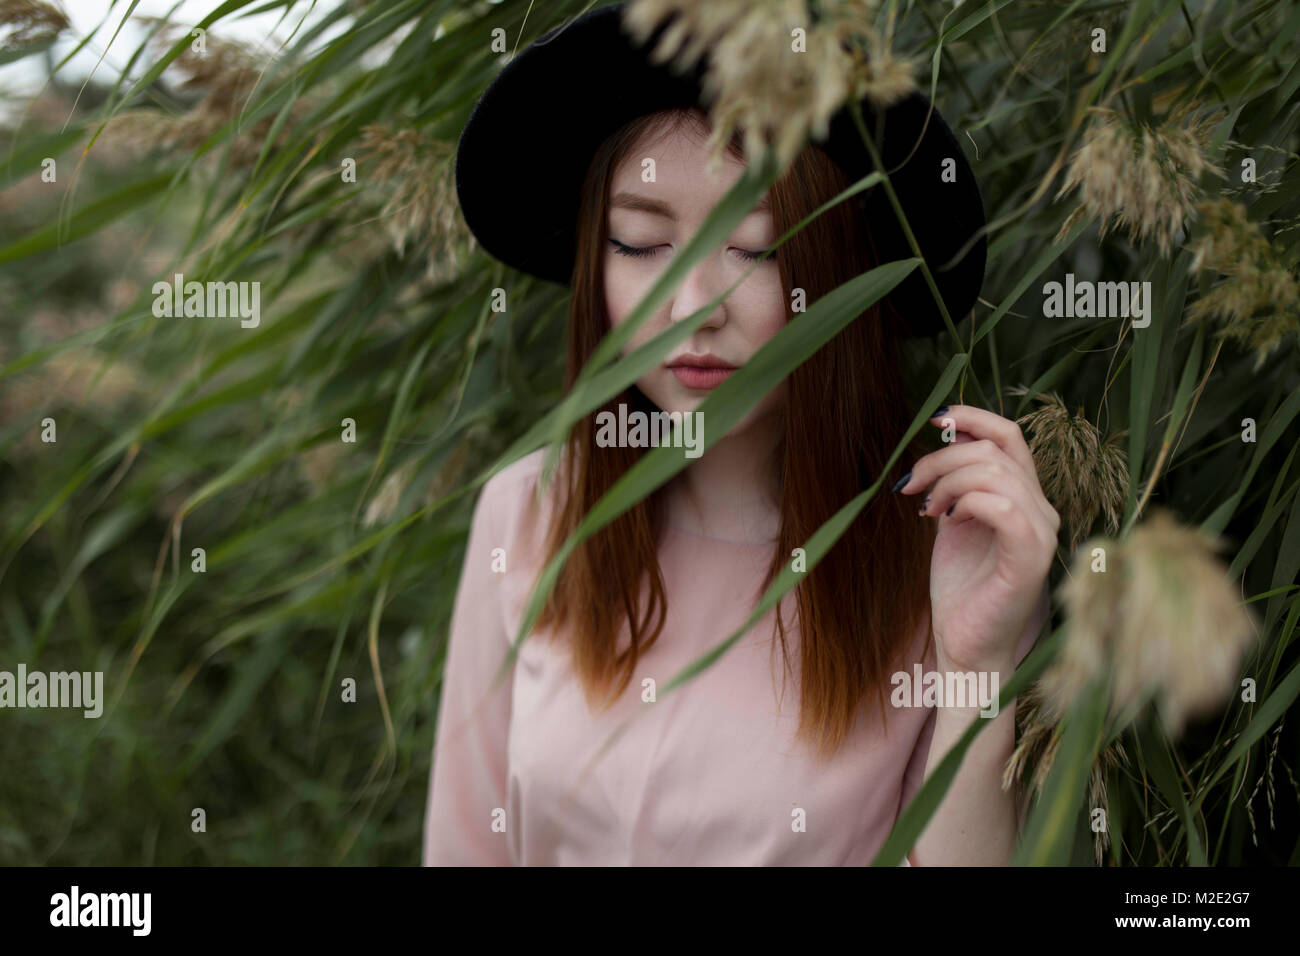 Pensive Asian woman standing in field of tall grass Stock Photo